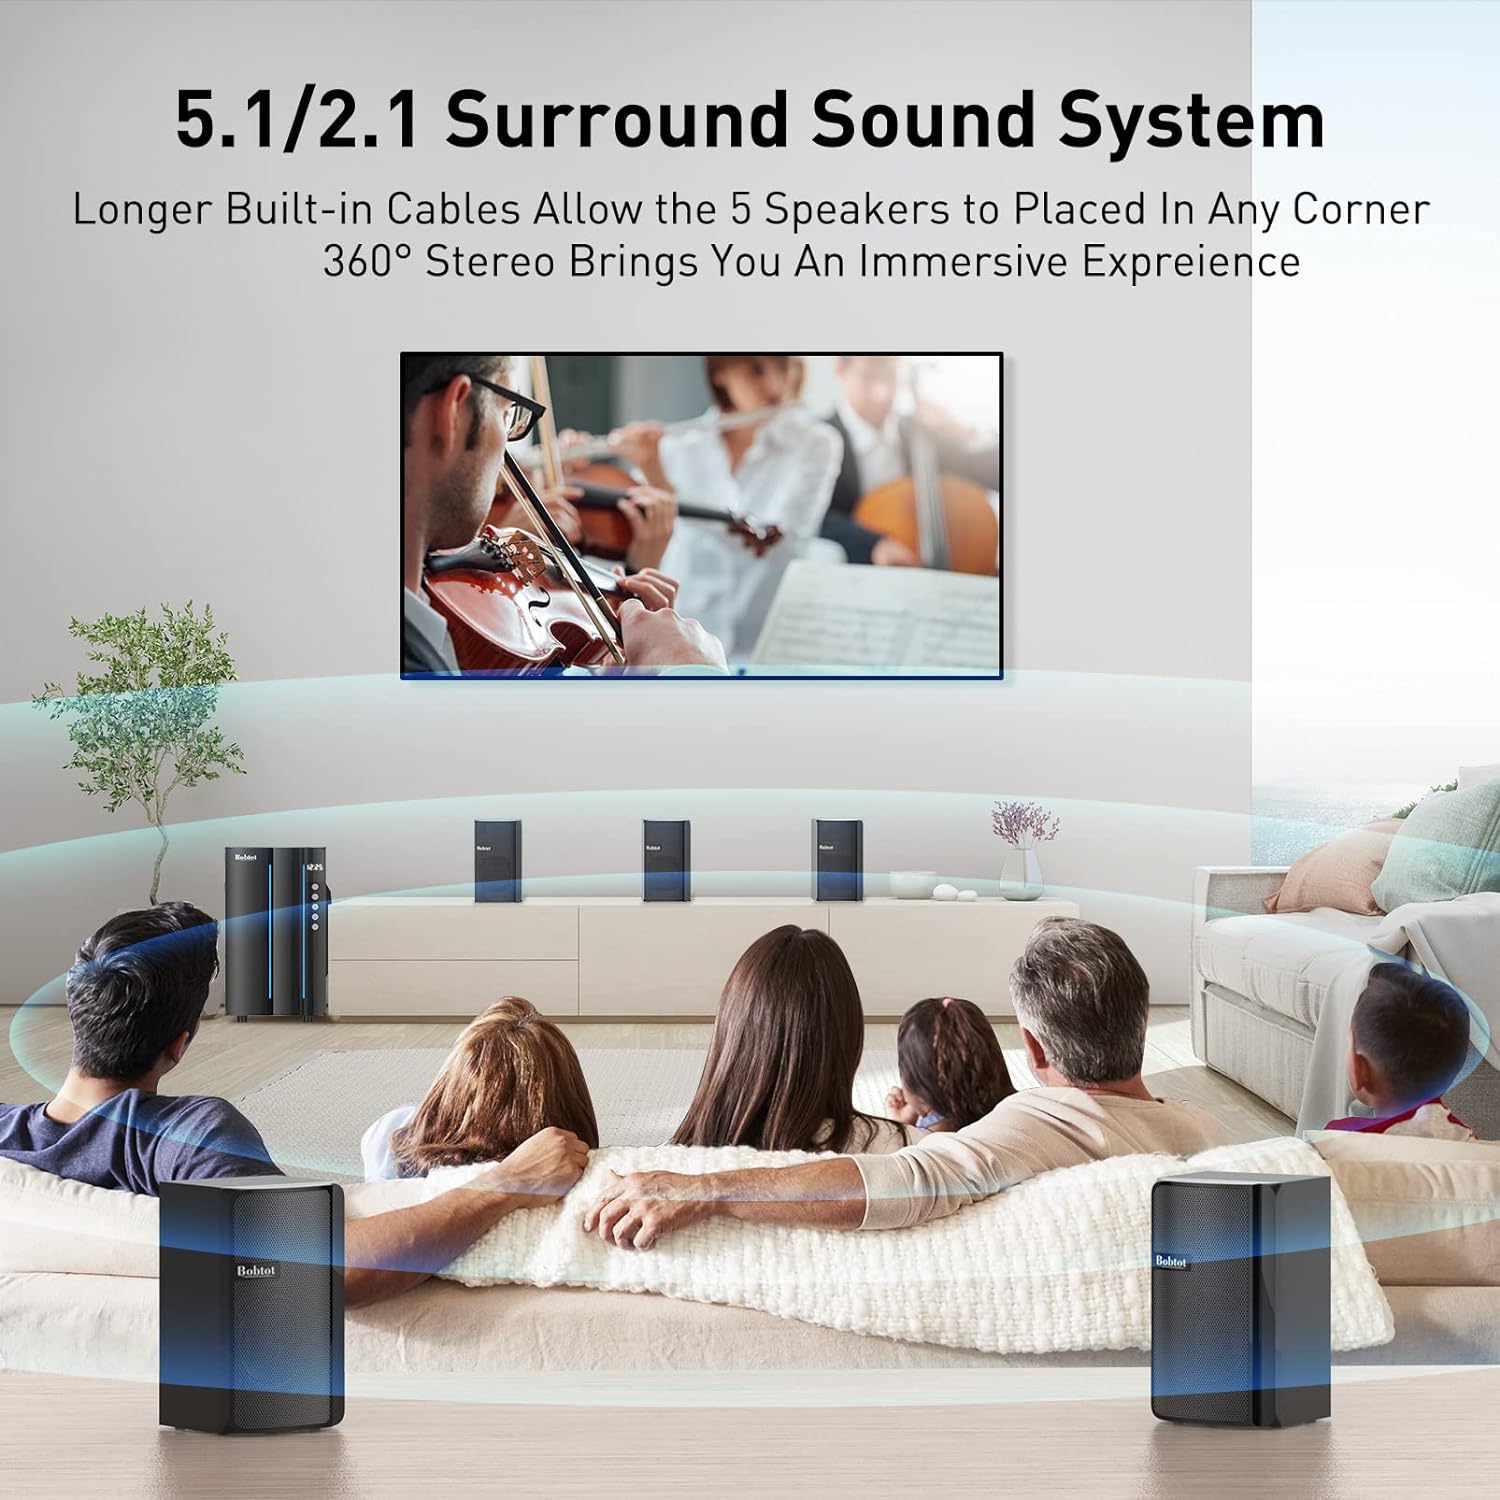 Bobtot Home Theater Systems Surround Sound Speakers - 800 Watts 6.5inch Subwoofer 5.1/2.1 Channel Wired Home Audio Stereo System with HDMI ARC Optical Bluetooth Input for TV